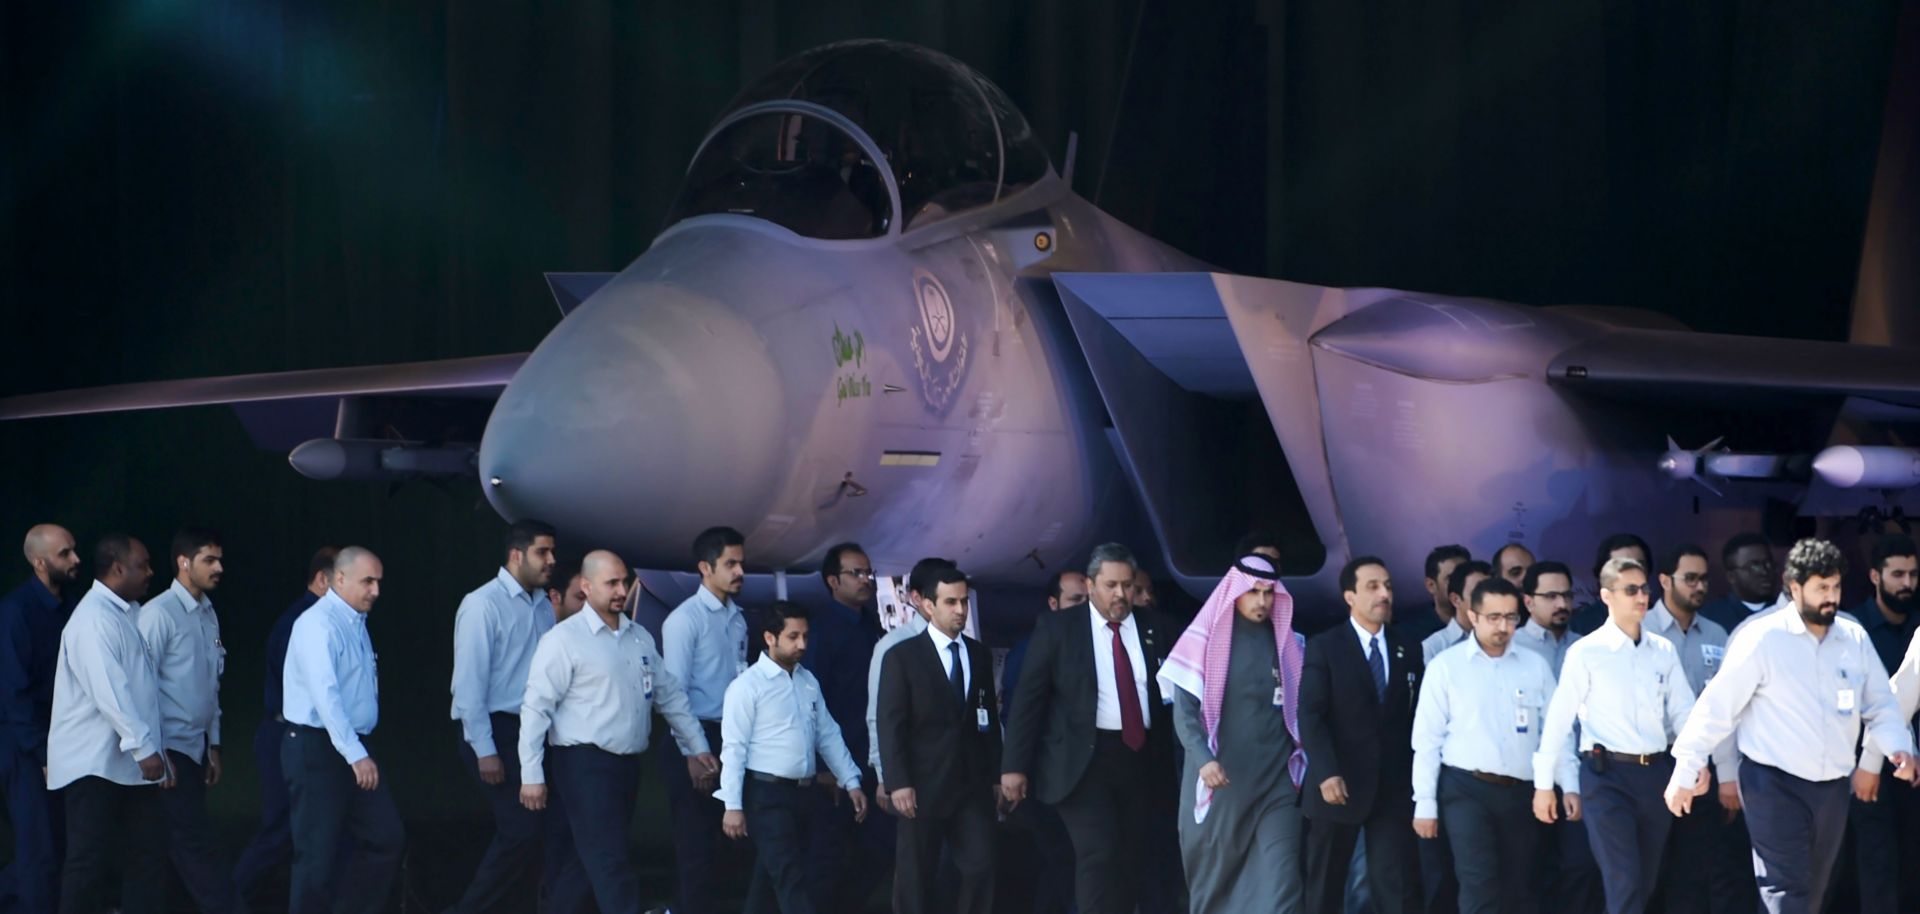 Saudi air force officers and technical staff walk past an advanced F-15SA fighter jet during a ceremony on Jan. 25, 2017 in Riyadh marking the 50th anniversary of the creation of the King Faisal Air Academy.